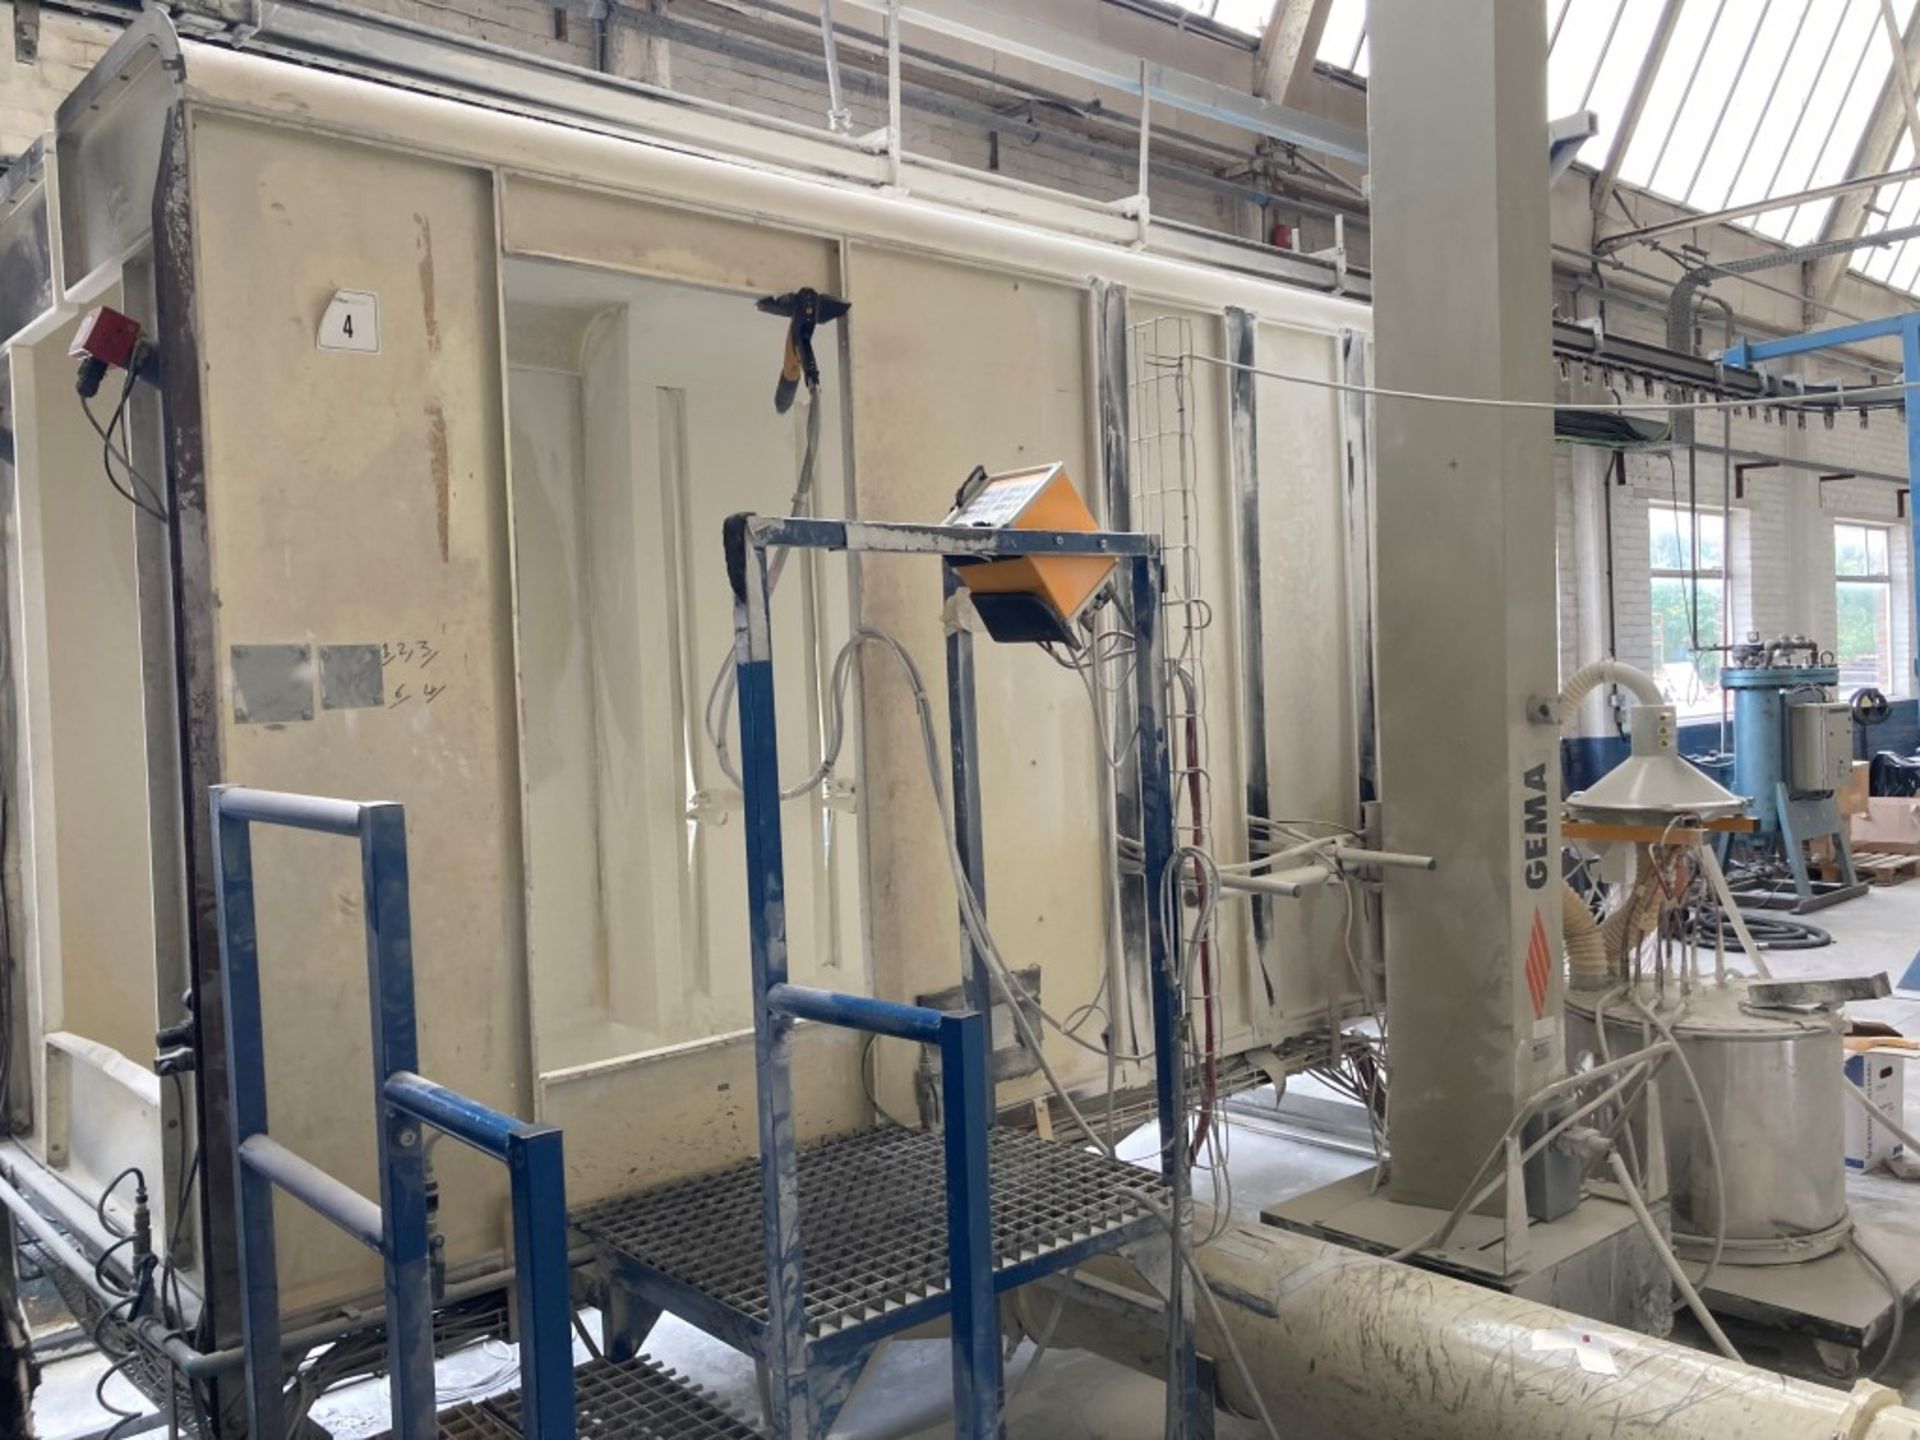 Gema Powder Spray Booth (White) with 6 Guns (Risk Assesment & Method Statement Required For Removal)